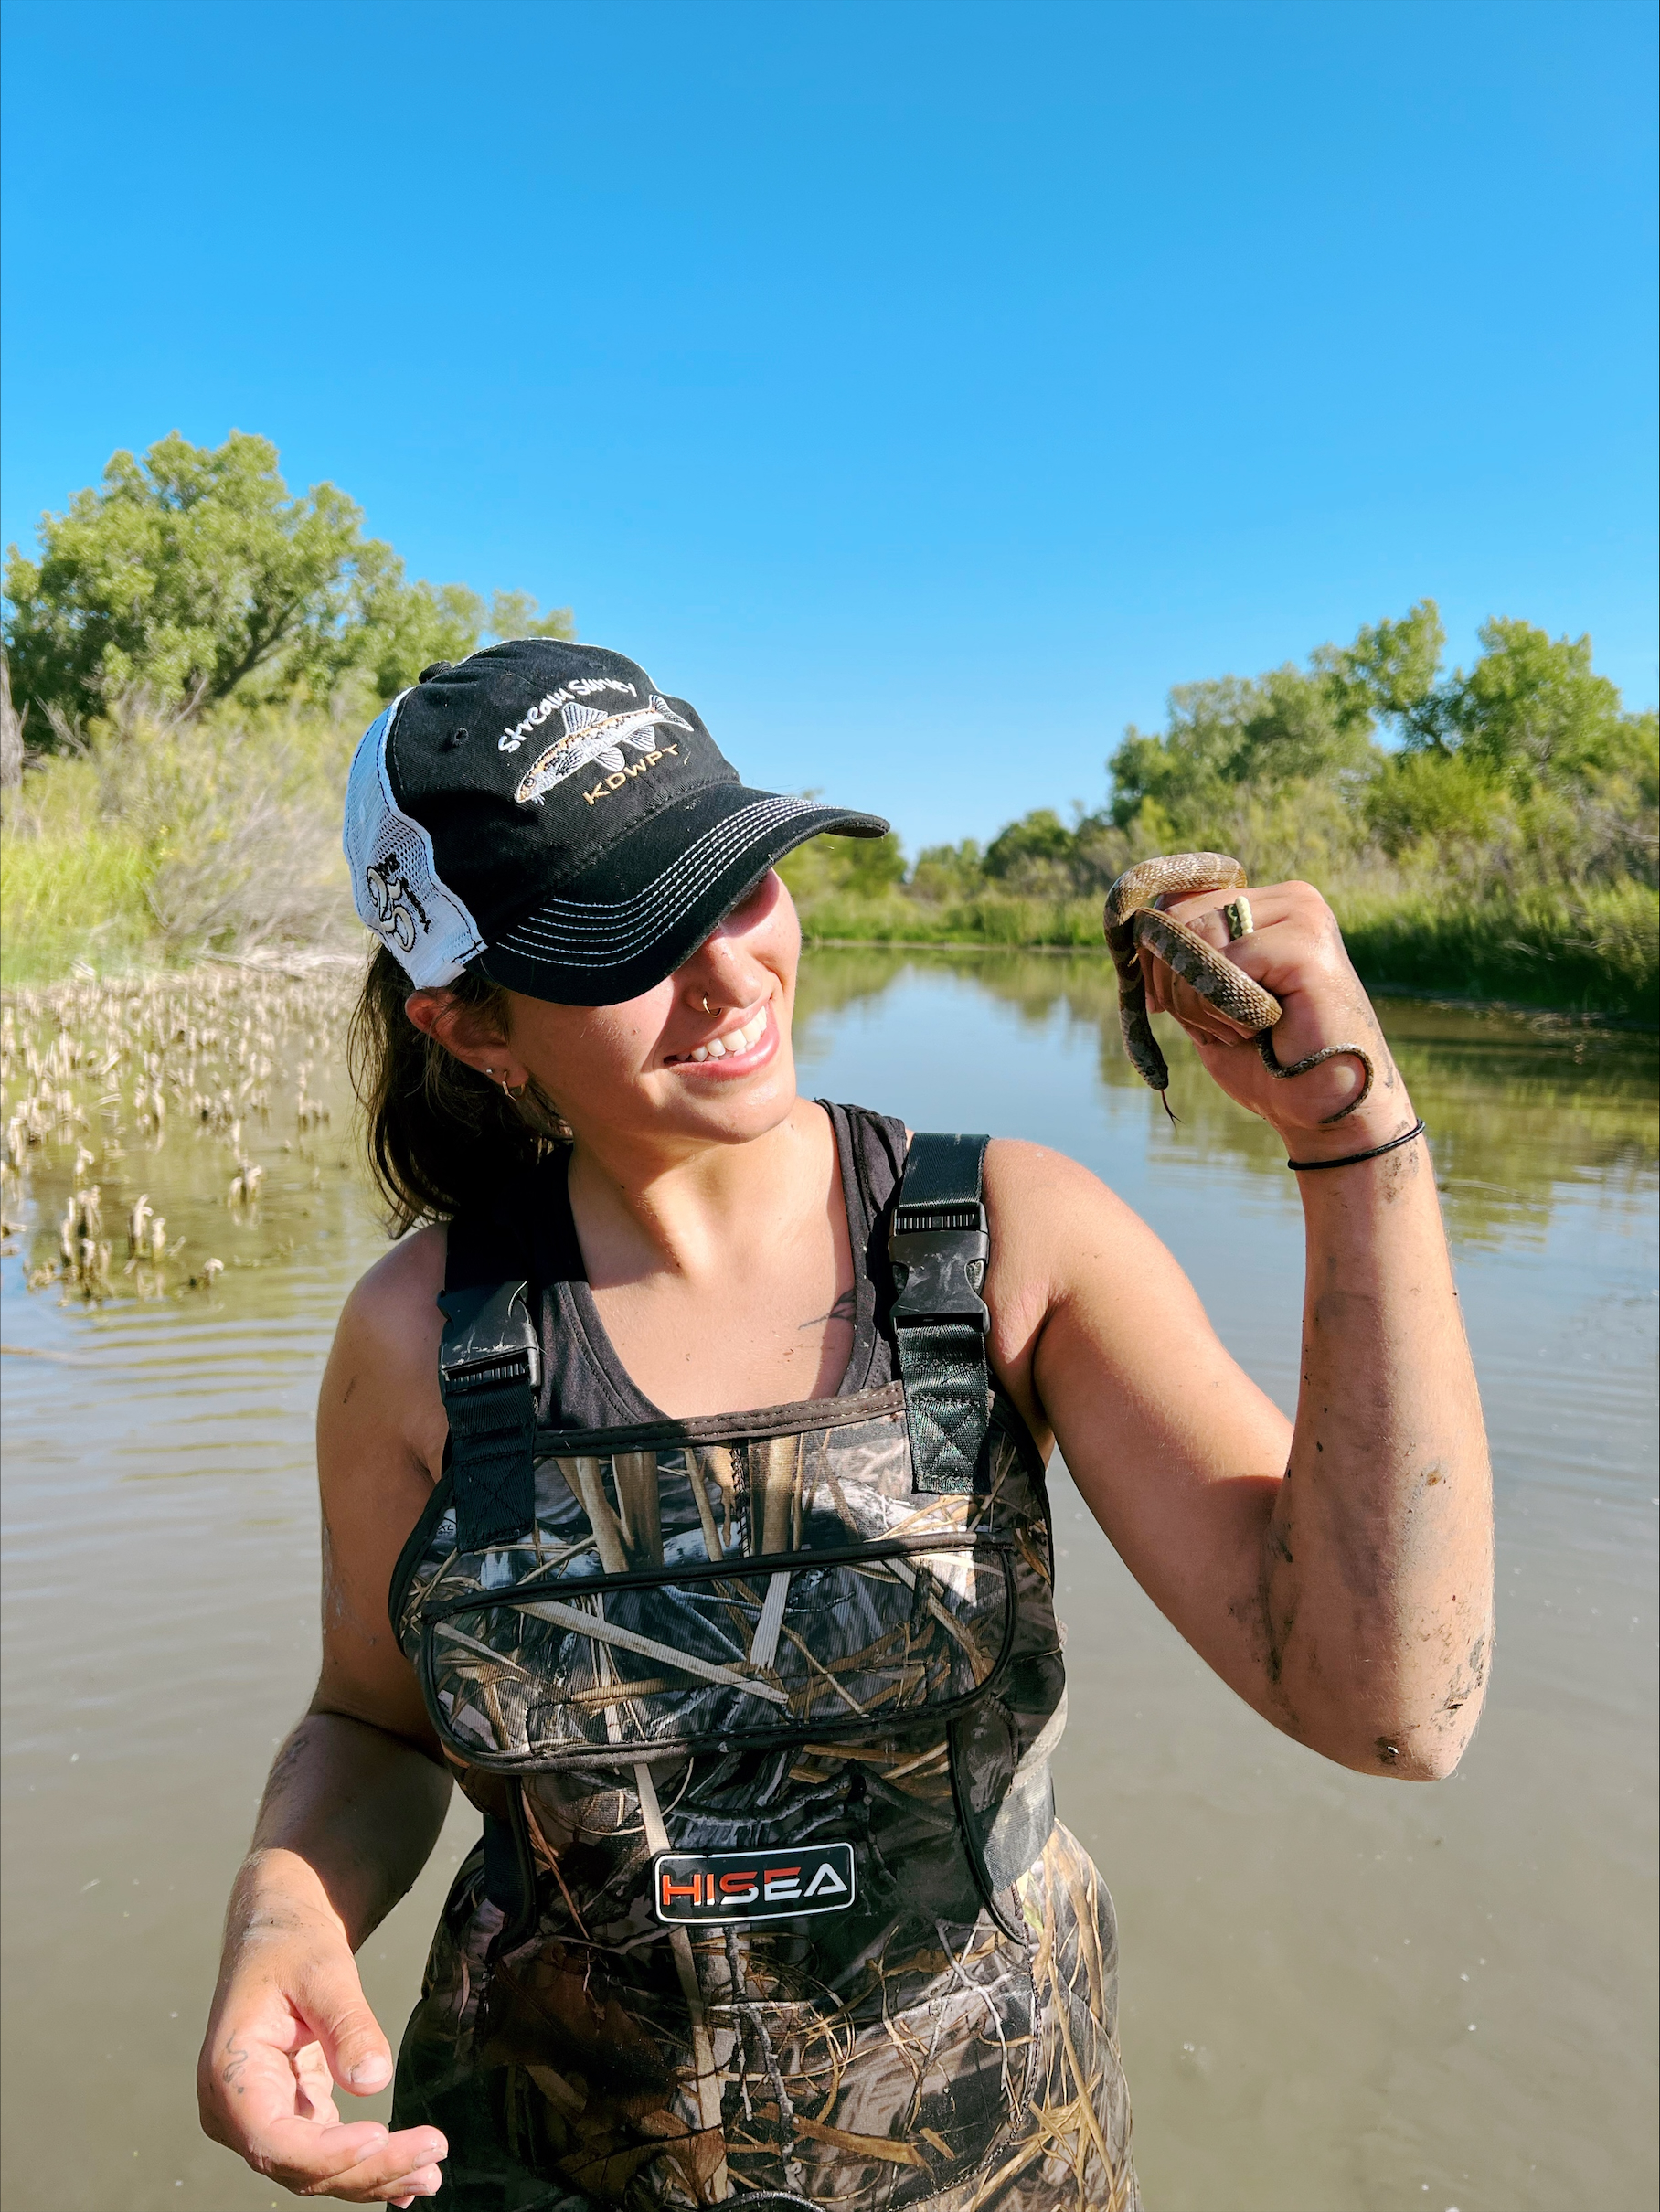 Student is near the camera wearing a baseball cap and waders. She is smiling but away from the camera, facing a small snake she is holding in her left hand.